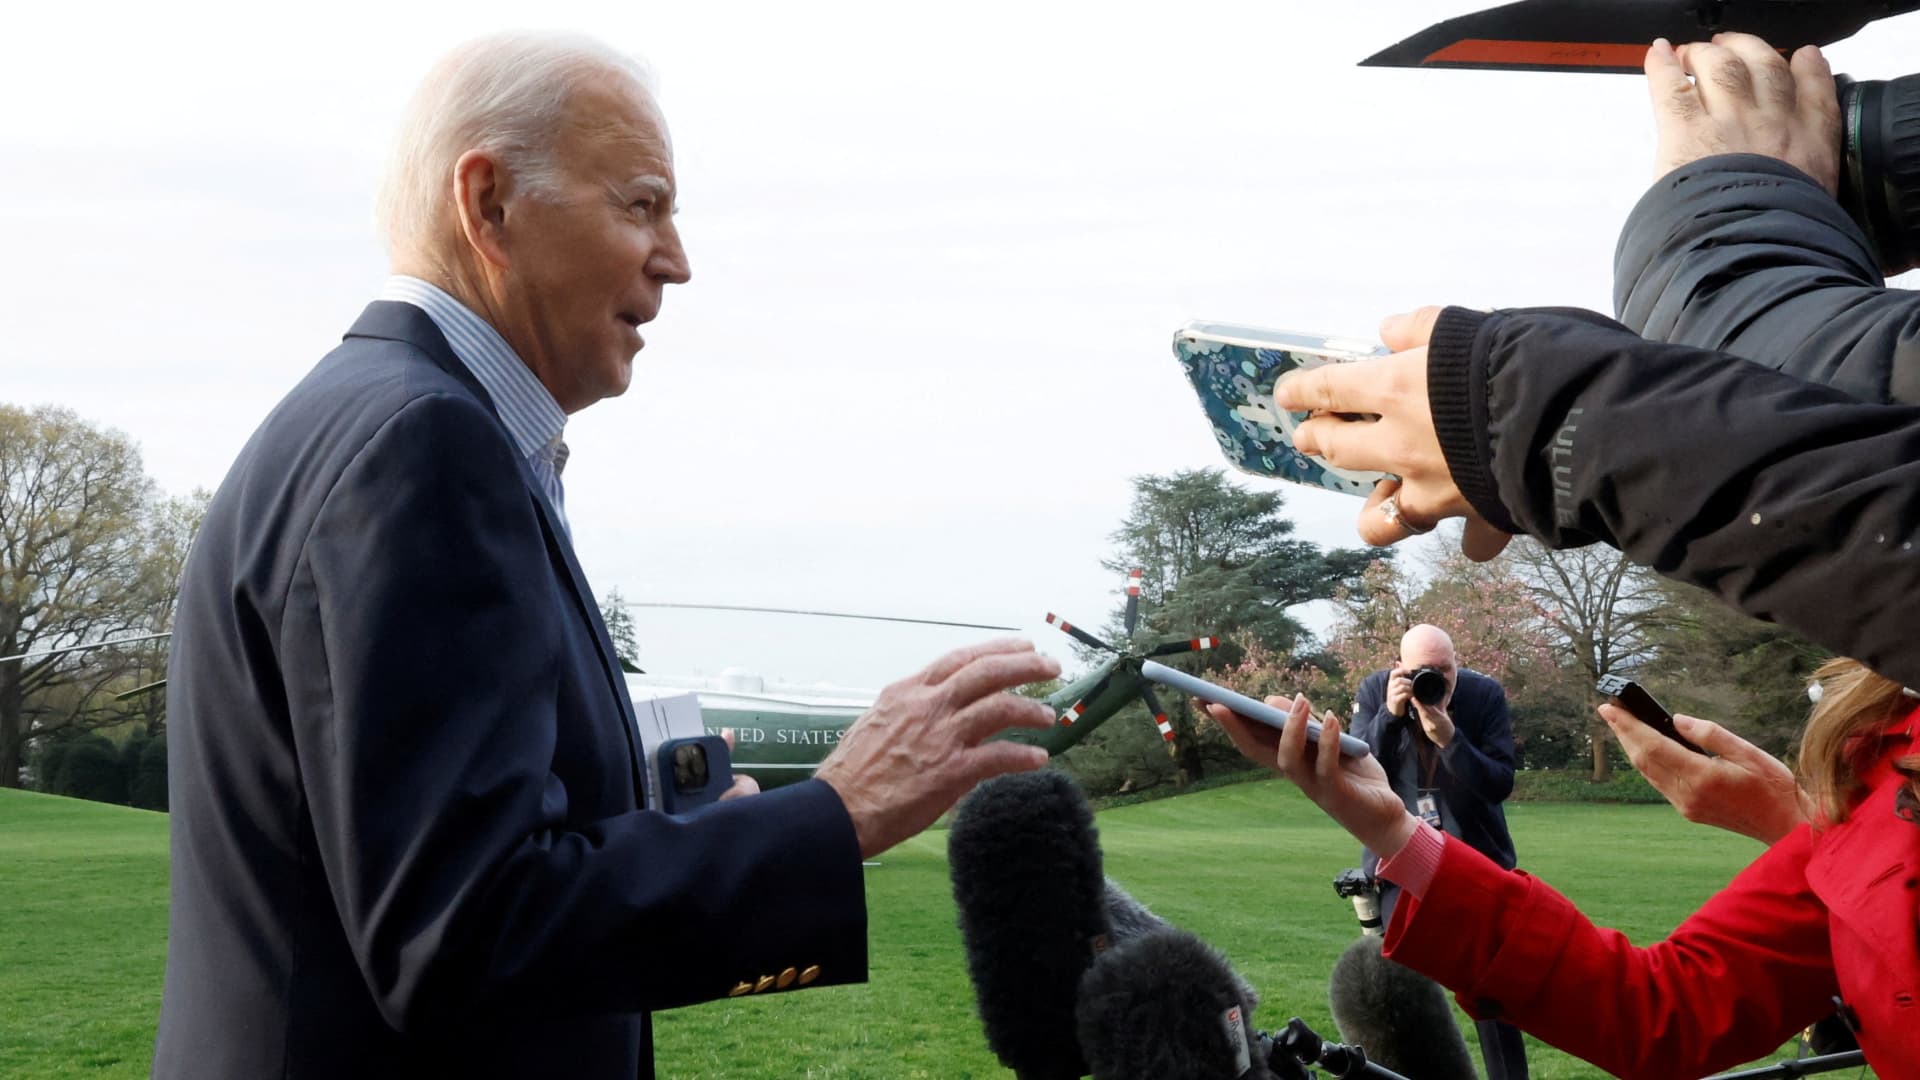 Members of the media ask questions to U.S. President Joe Biden as he walks to the Marine One helicopter to depart for travel to Mississippi to view tornado damage, from the White House in Washington, U.S., March 31, 2023. 